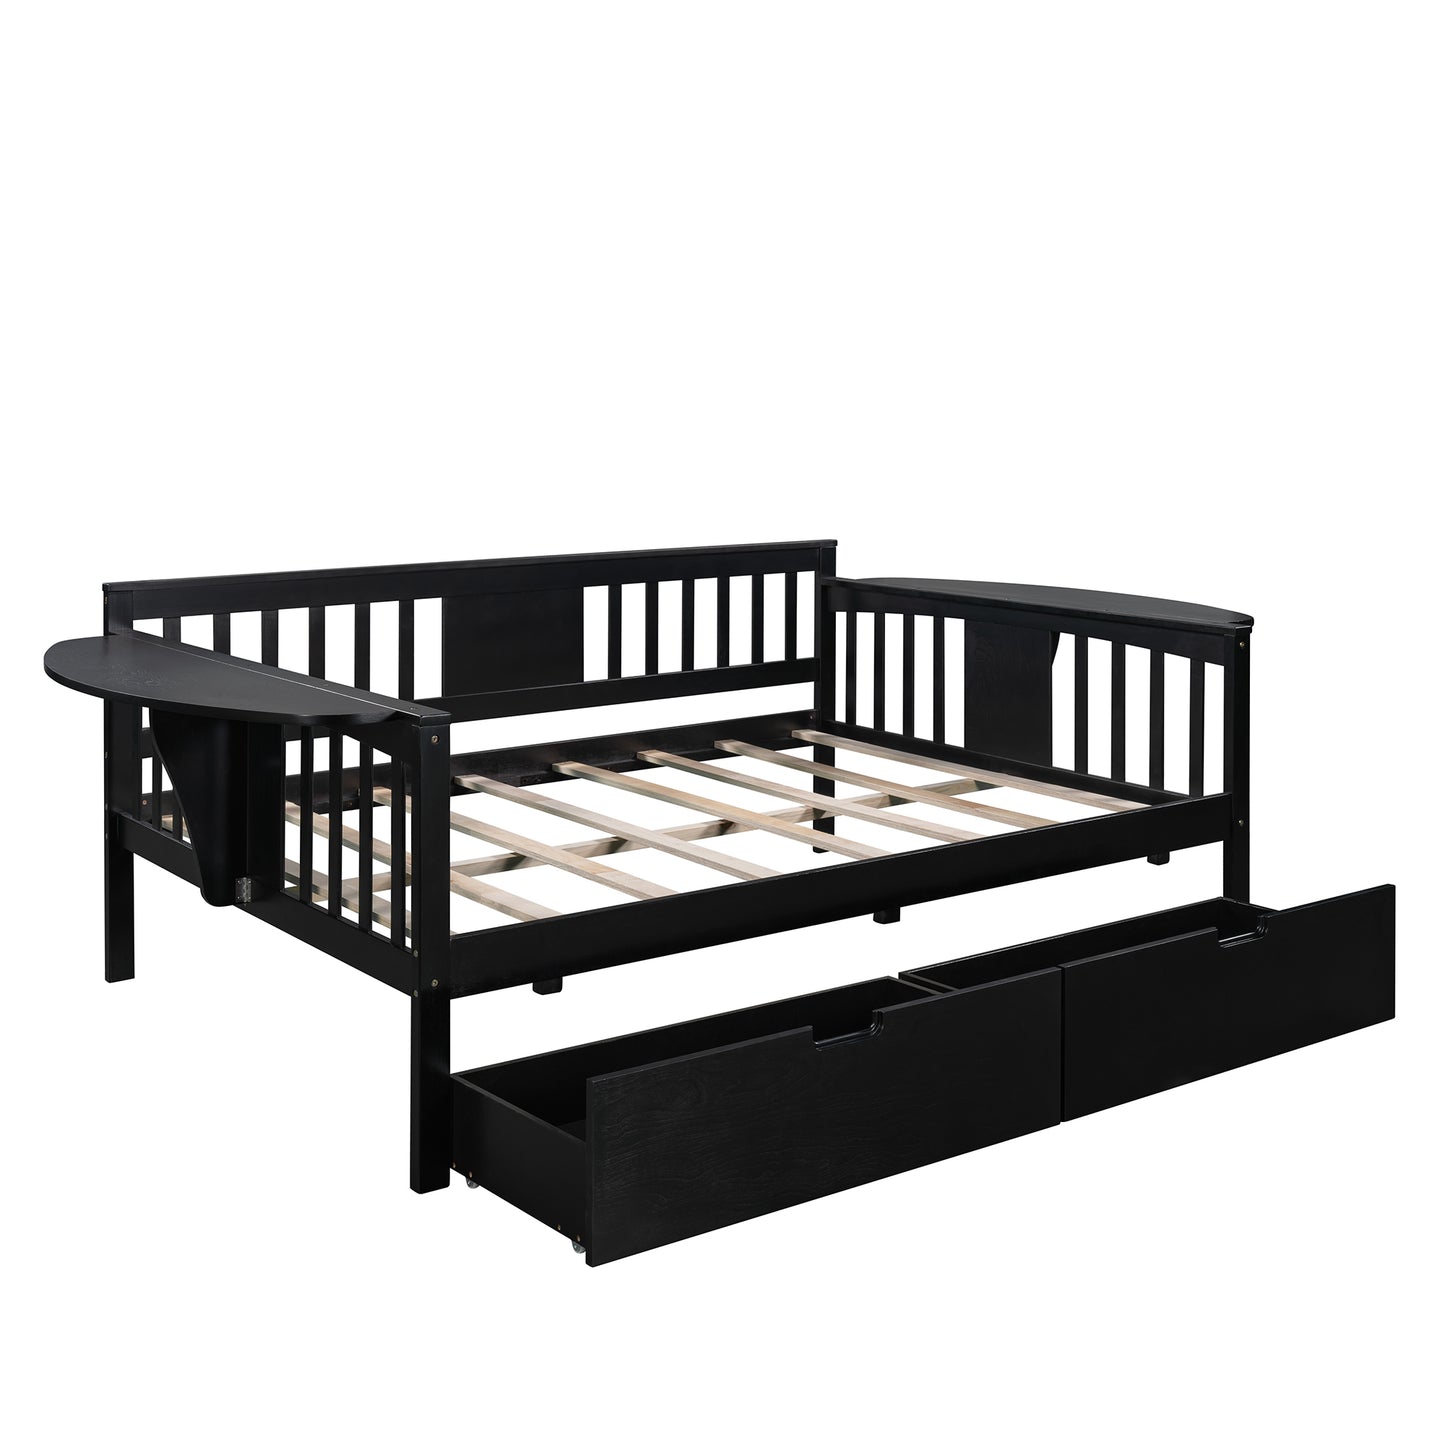 Full size Daybed with Two Drawers, Wood Slat Support, Espresso